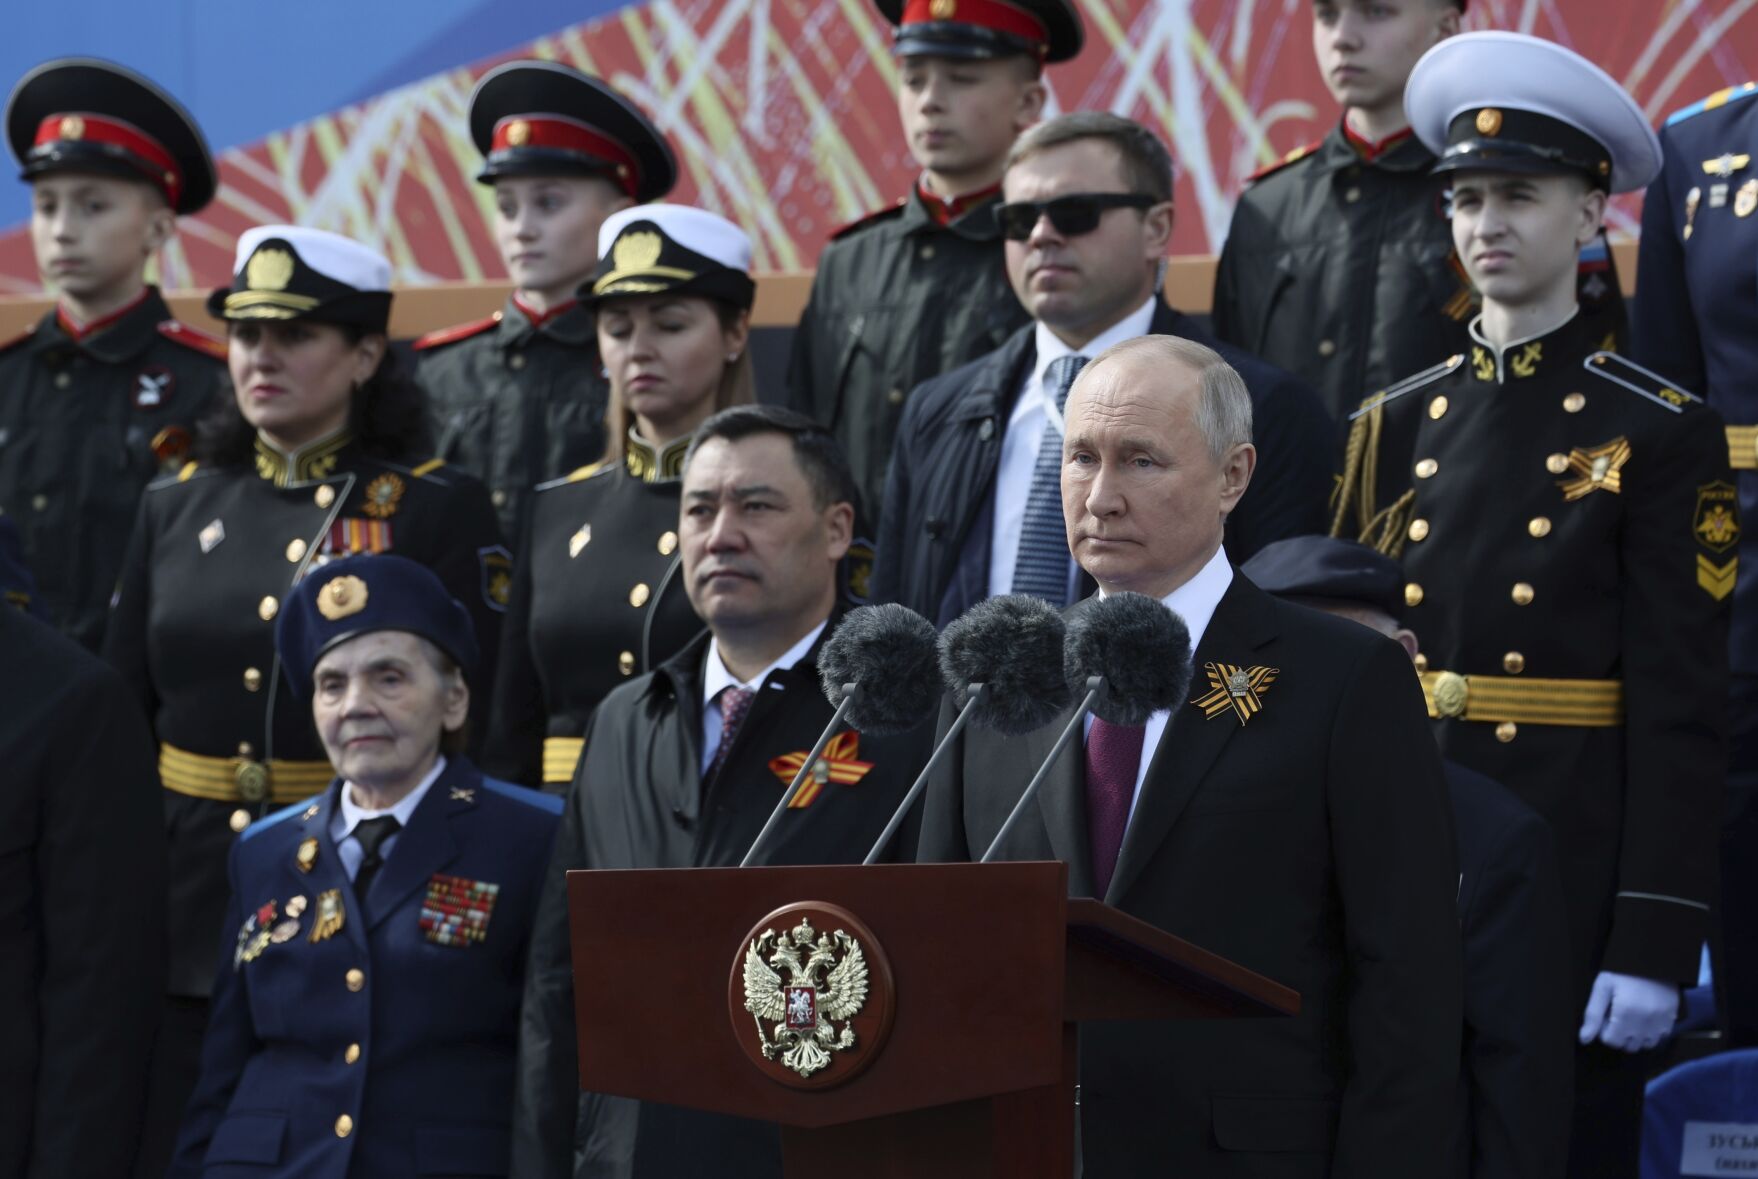 <p>Russian President Vladimir Putin delivers his speech during the Victory Day military parade marking the 78th anniversary of the end of World War II in Red square in Moscow, Russia, Monday, May 9, 2022. (Gavriil Grigorov, Sputnik, Kremlin Pool Photo via AP)</p>   PHOTO CREDIT: Gavriil Grigorov 